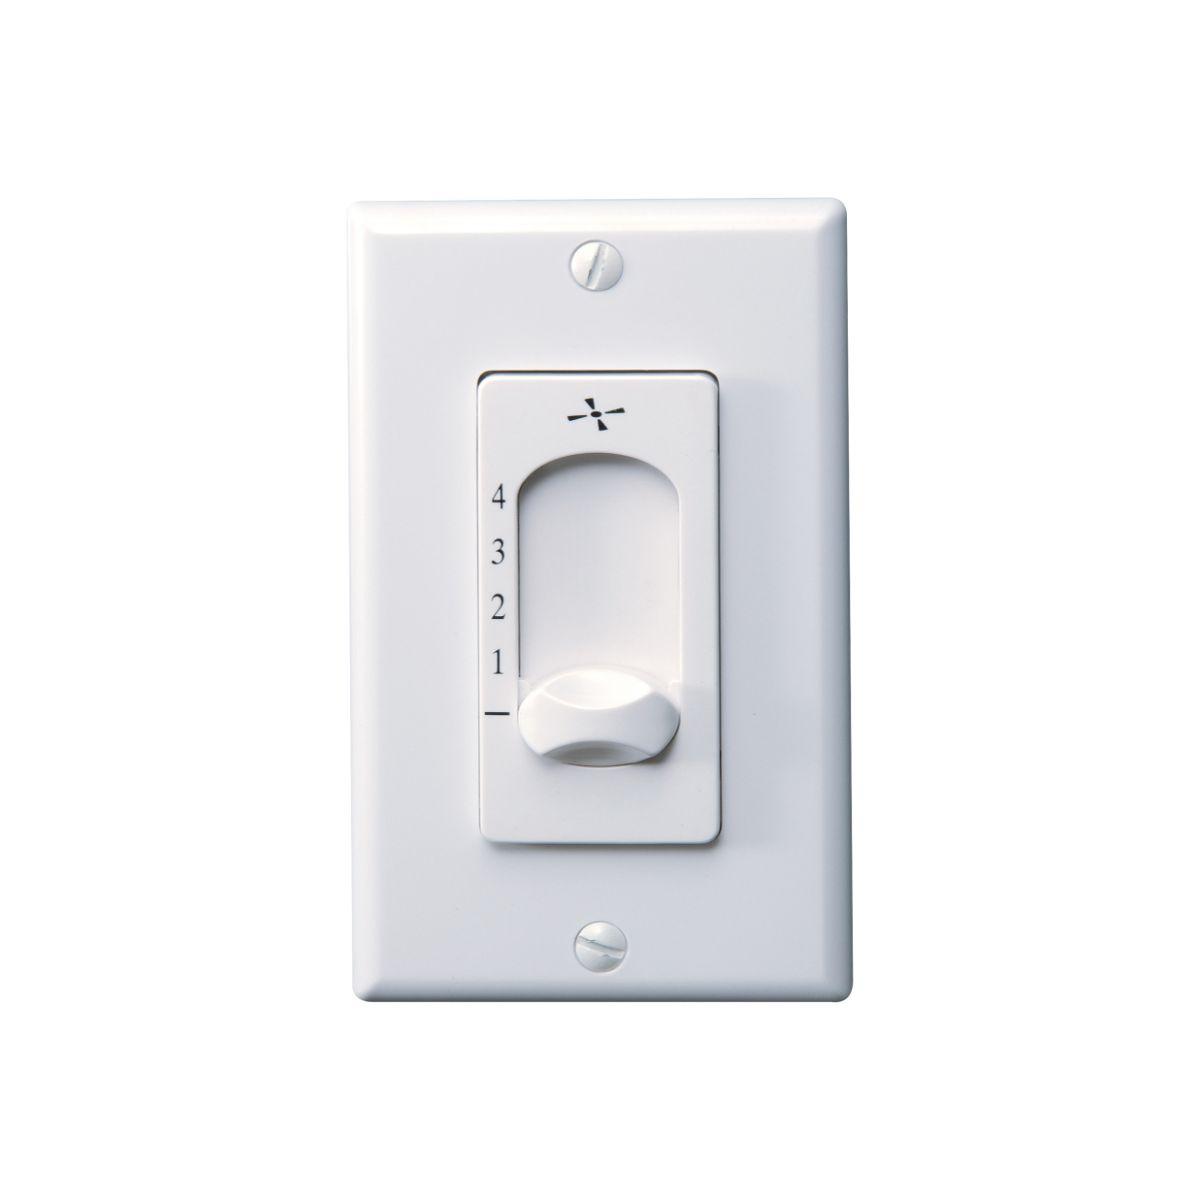 4-Speed Ceiling Fan Wall Control, White Finish